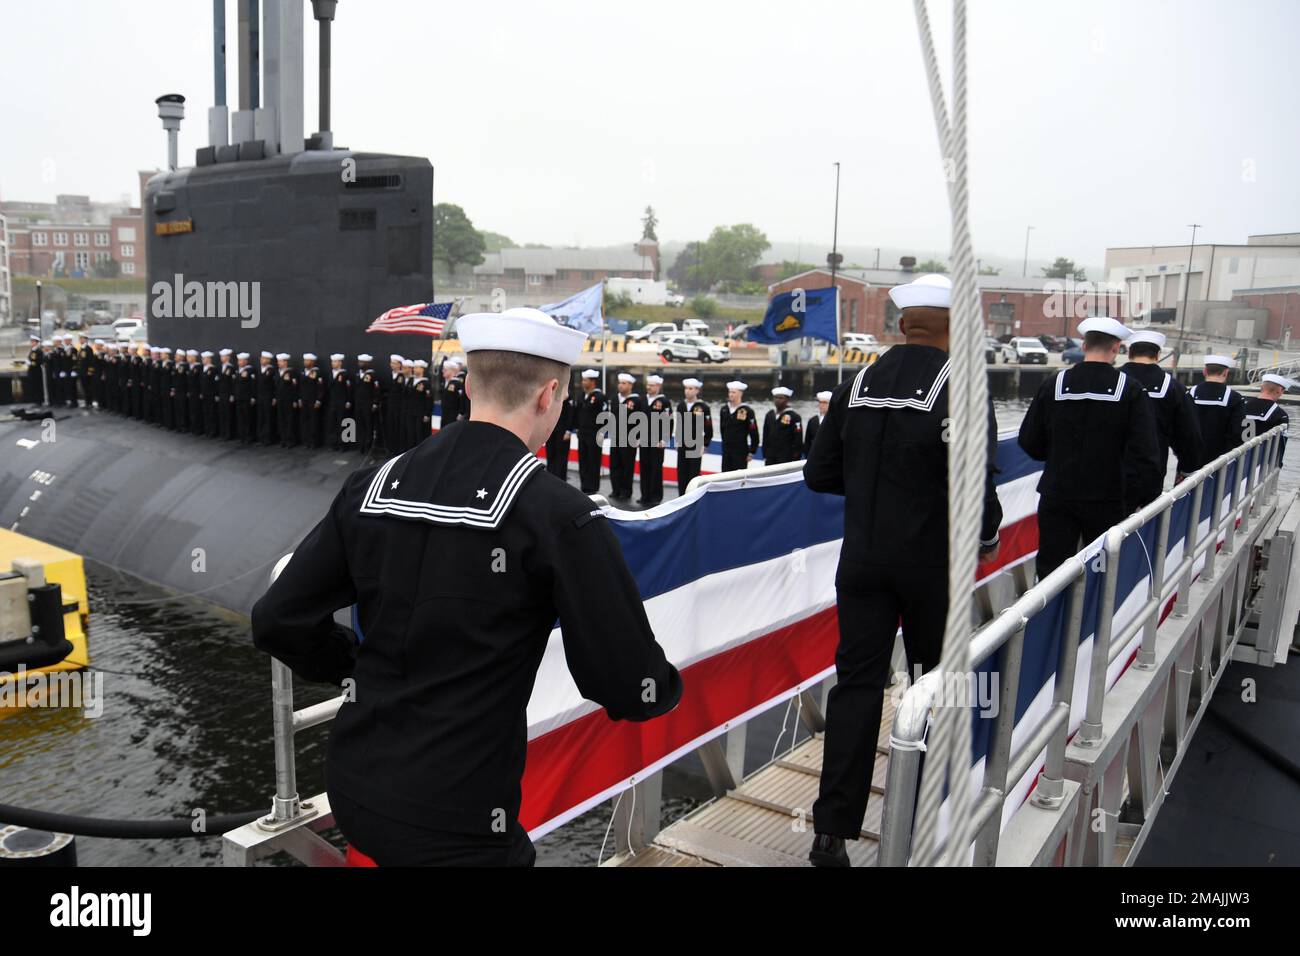 220528-N-GR655-0152 GROTON, Connecticut (May 28, 2022) – Crewmembers attached to the Virginia-class fast attack submarine USS Oregon (SSN 793) run aboard to “bring the ship to life” during a commissioning ceremony in Groton, Conn., May 28, 2022. SSN 793, the third U.S Navy ship launched with the name Oregon and first in more than a century, is a flexible, multi-mission platform designed to carry out the seven core competencies of the submarine force: anti-submarine warfare; anti-surface warfare; delivery of special operations forces; strike warfare; irregular warfare; intelligence, surveillanc Stock Photo